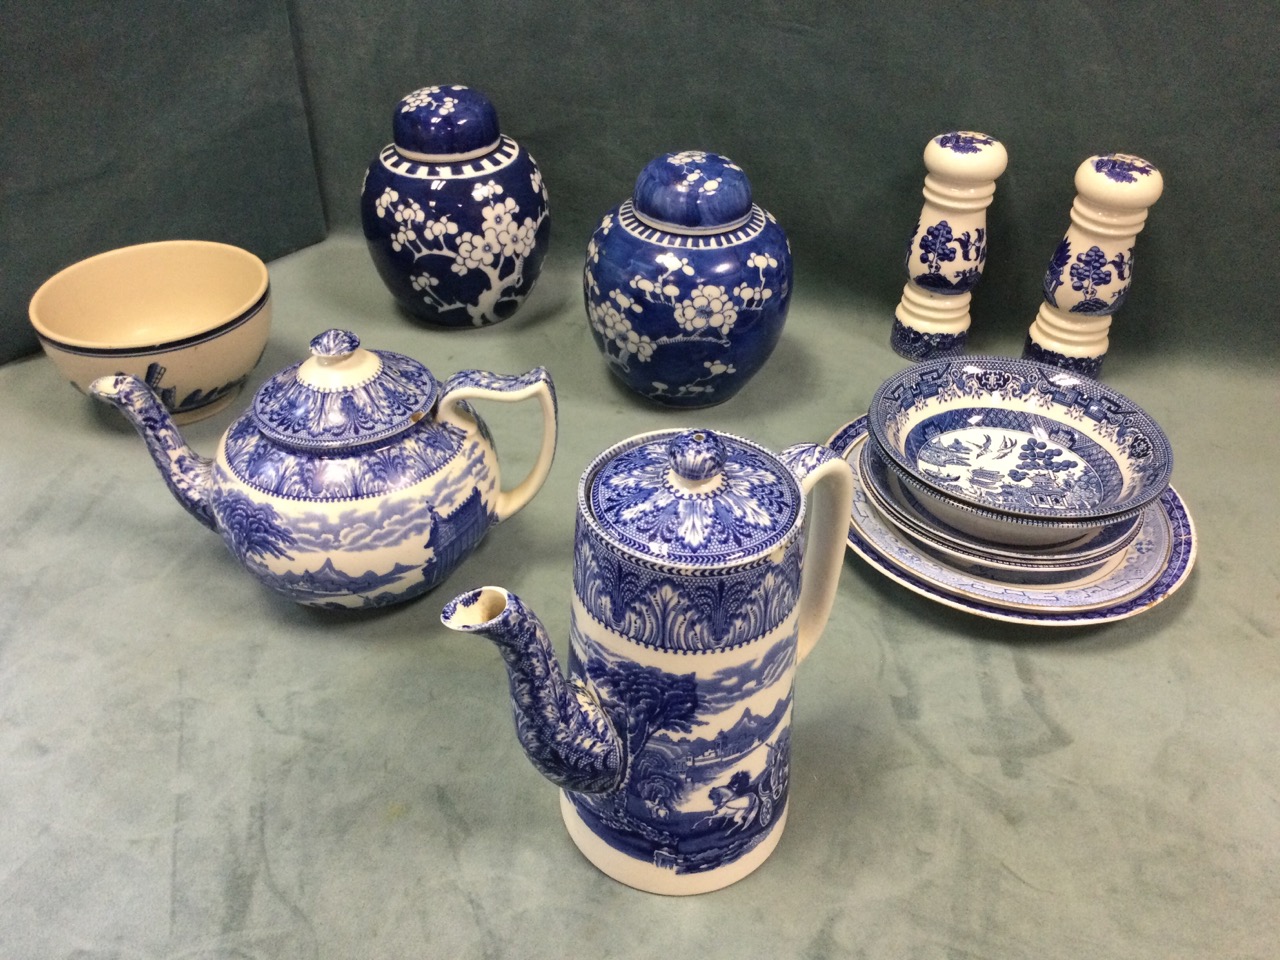 Miscellaneous blue & white ceramics including teapots, a pair of ginger jars & covers, jugs, - Image 3 of 3